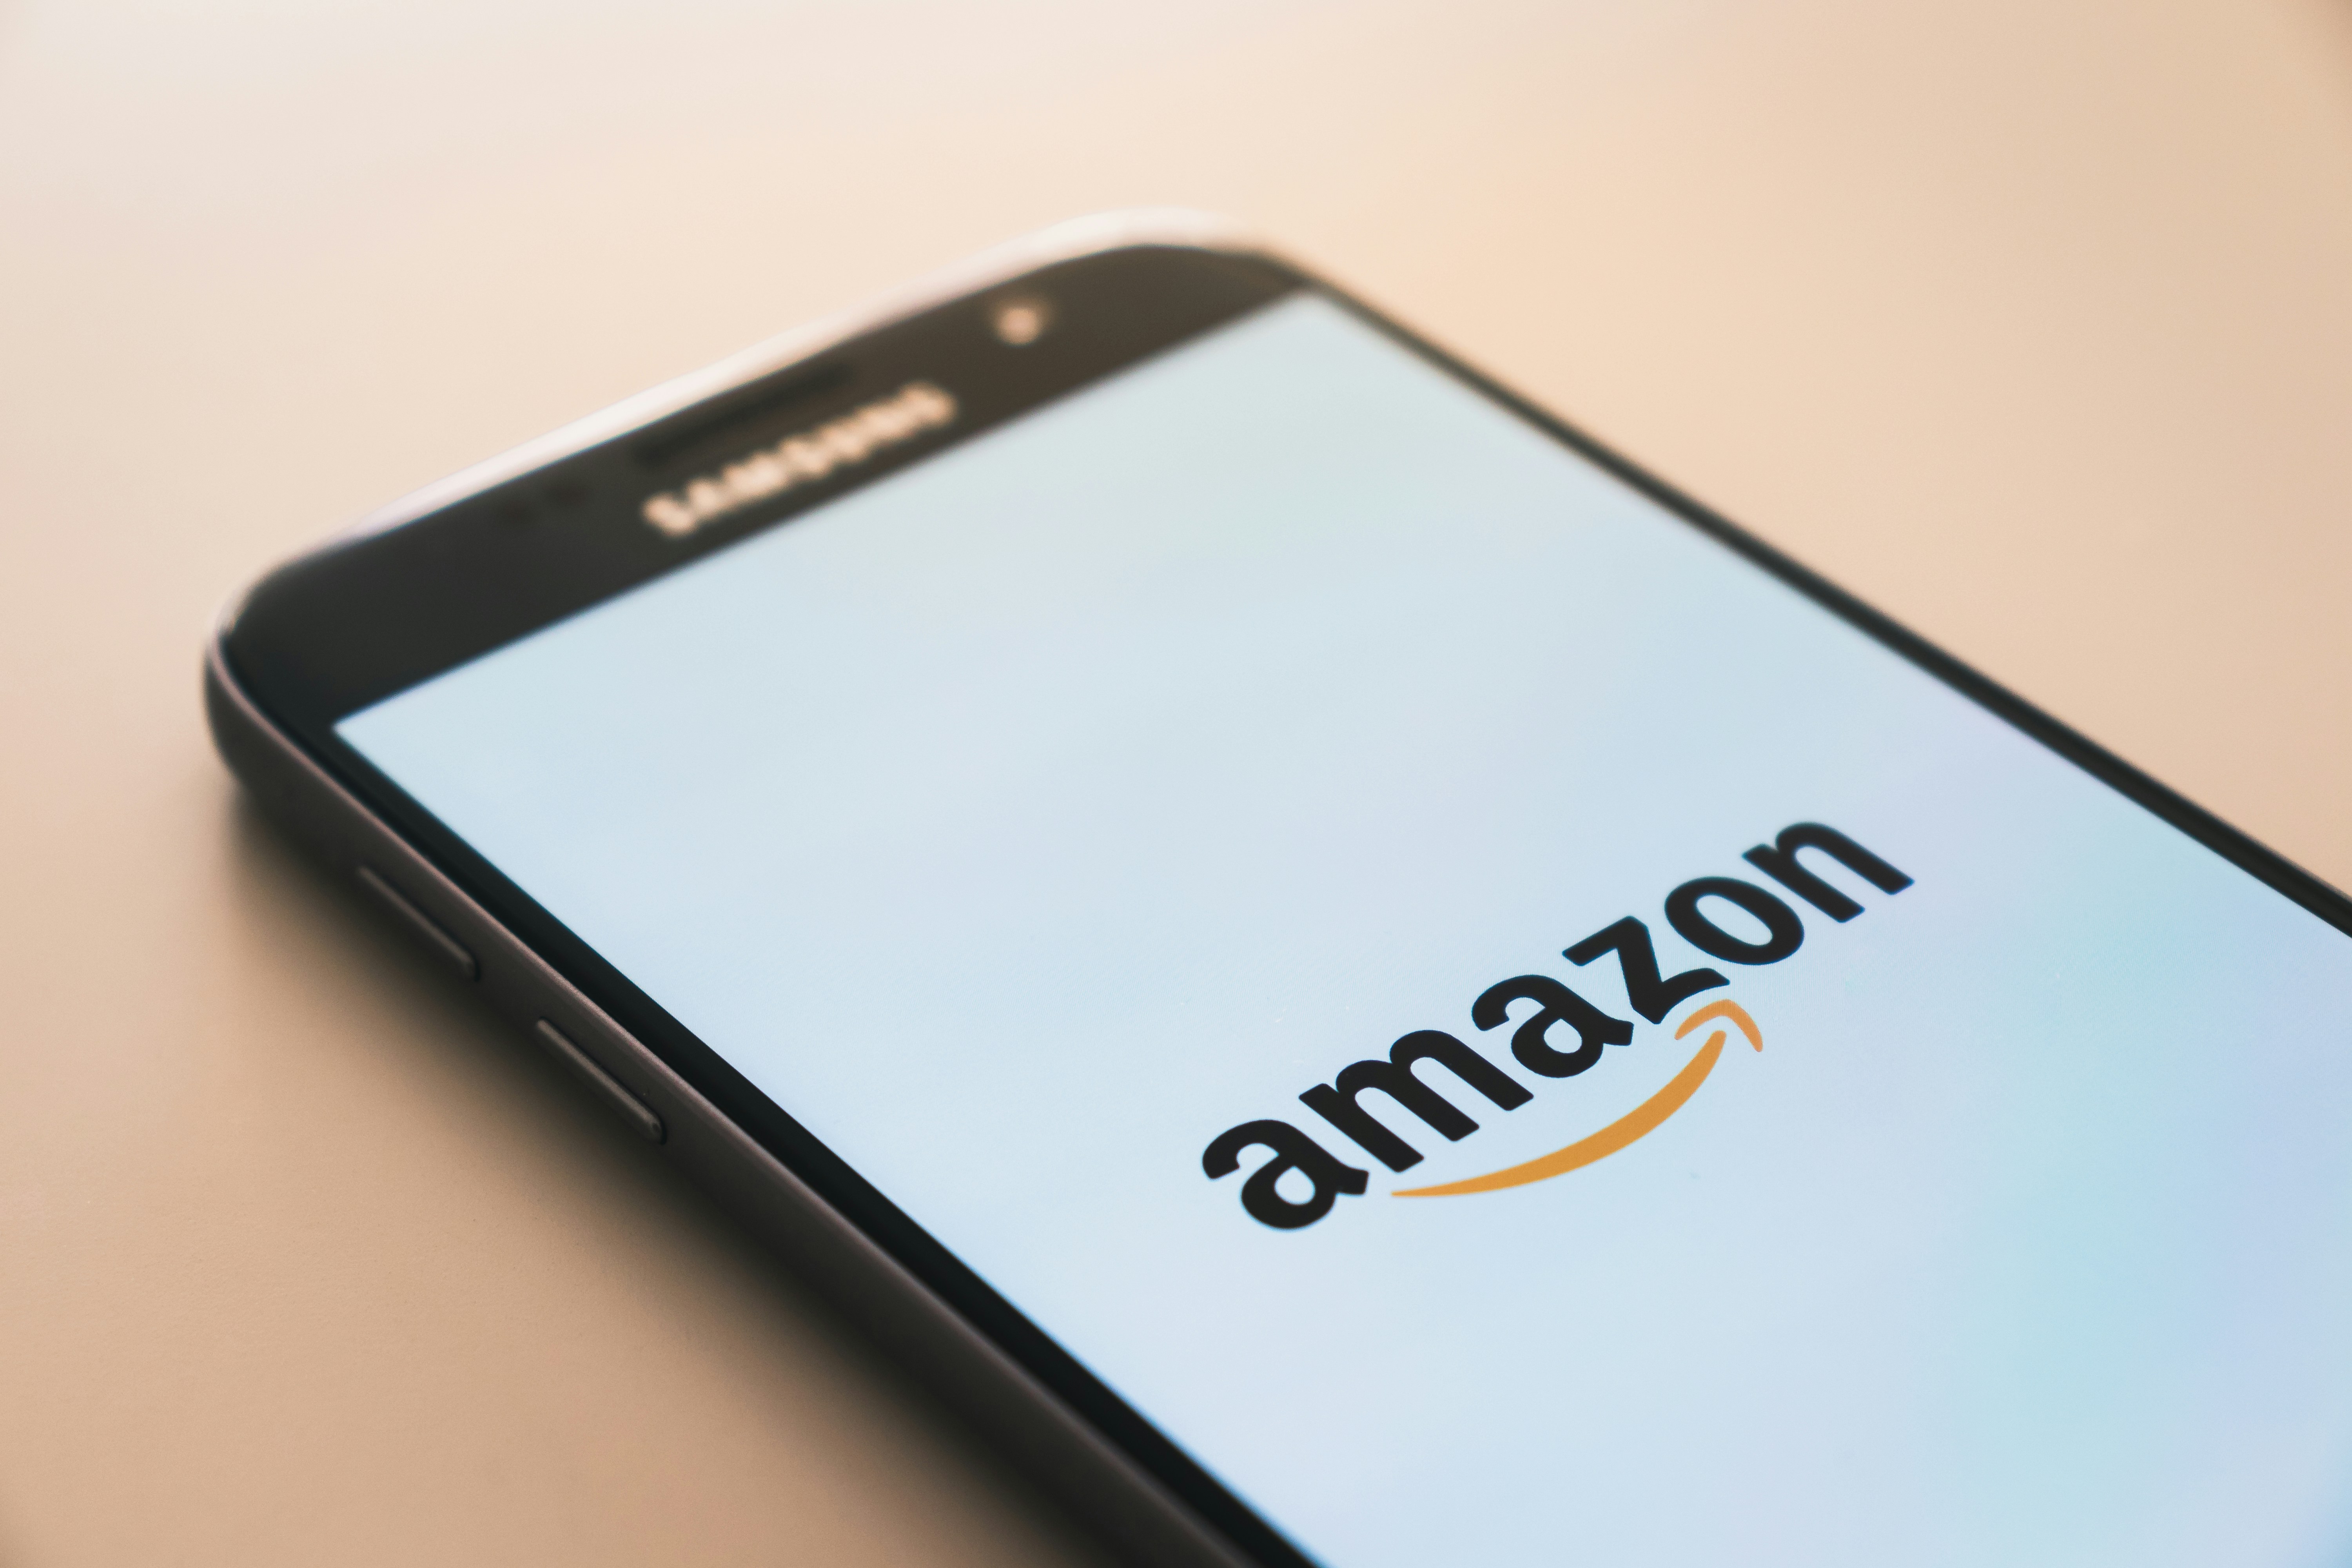 Amazon Sales Big for Small Business